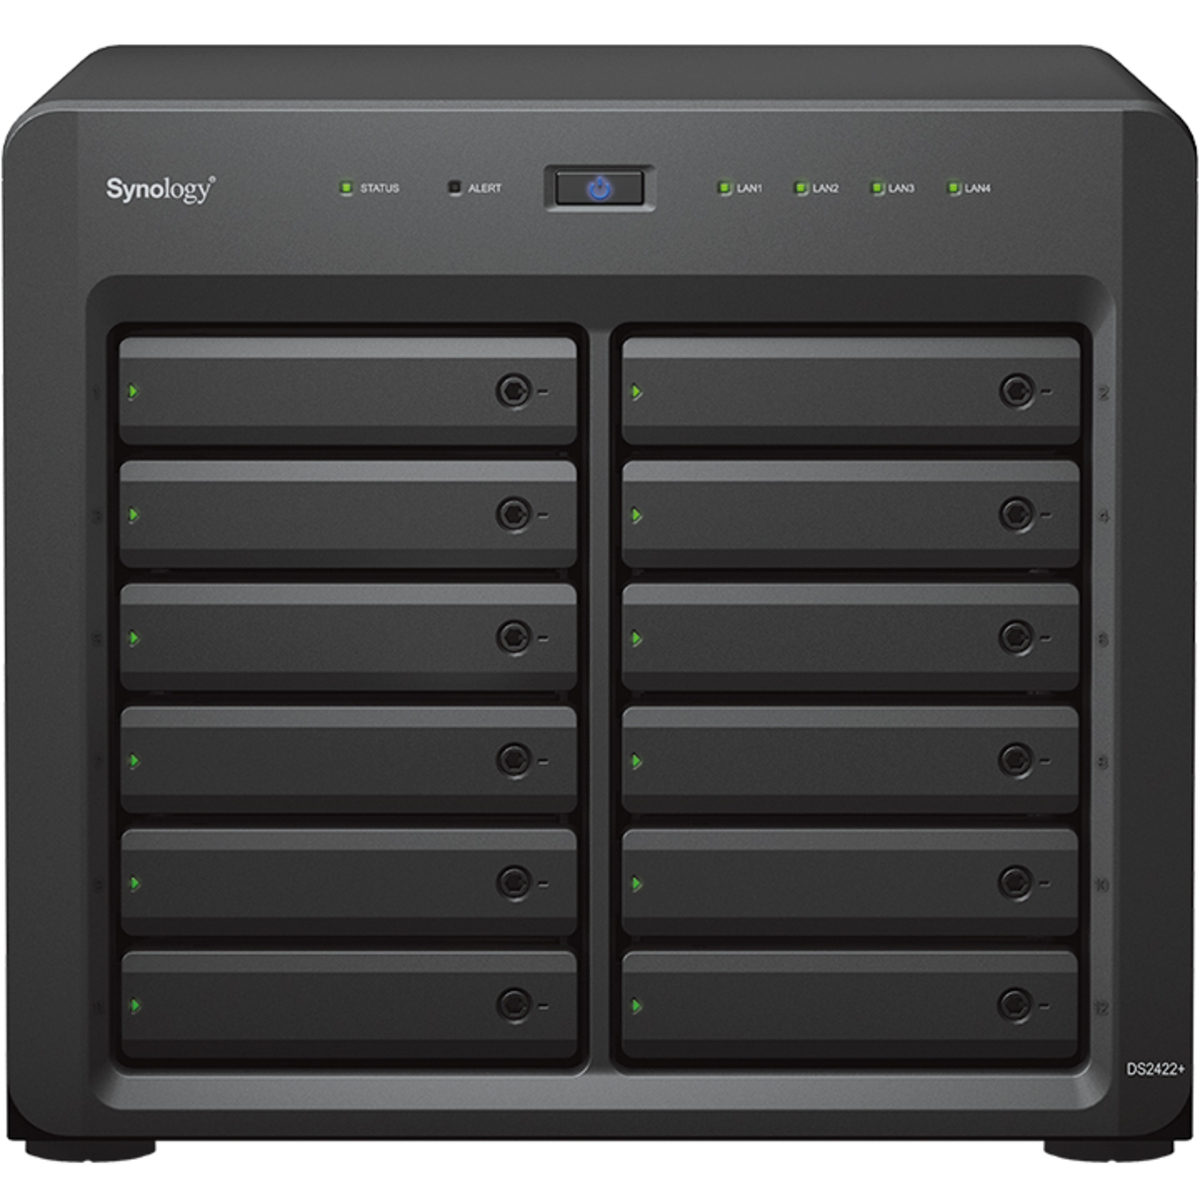 Synology DiskStation DS2422+ 144tb 12-Bay Desktop Multimedia / Power User / Business NAS - Network Attached Storage Device 9x16tb Synology HAT5300 Series HAT5300-16T 3.5 7200rpm SATA 6Gb/s HDD ENTERPRISE Class Drives Installed - Burn-In Tested - FREE RAM UPGRADE DiskStation DS2422+